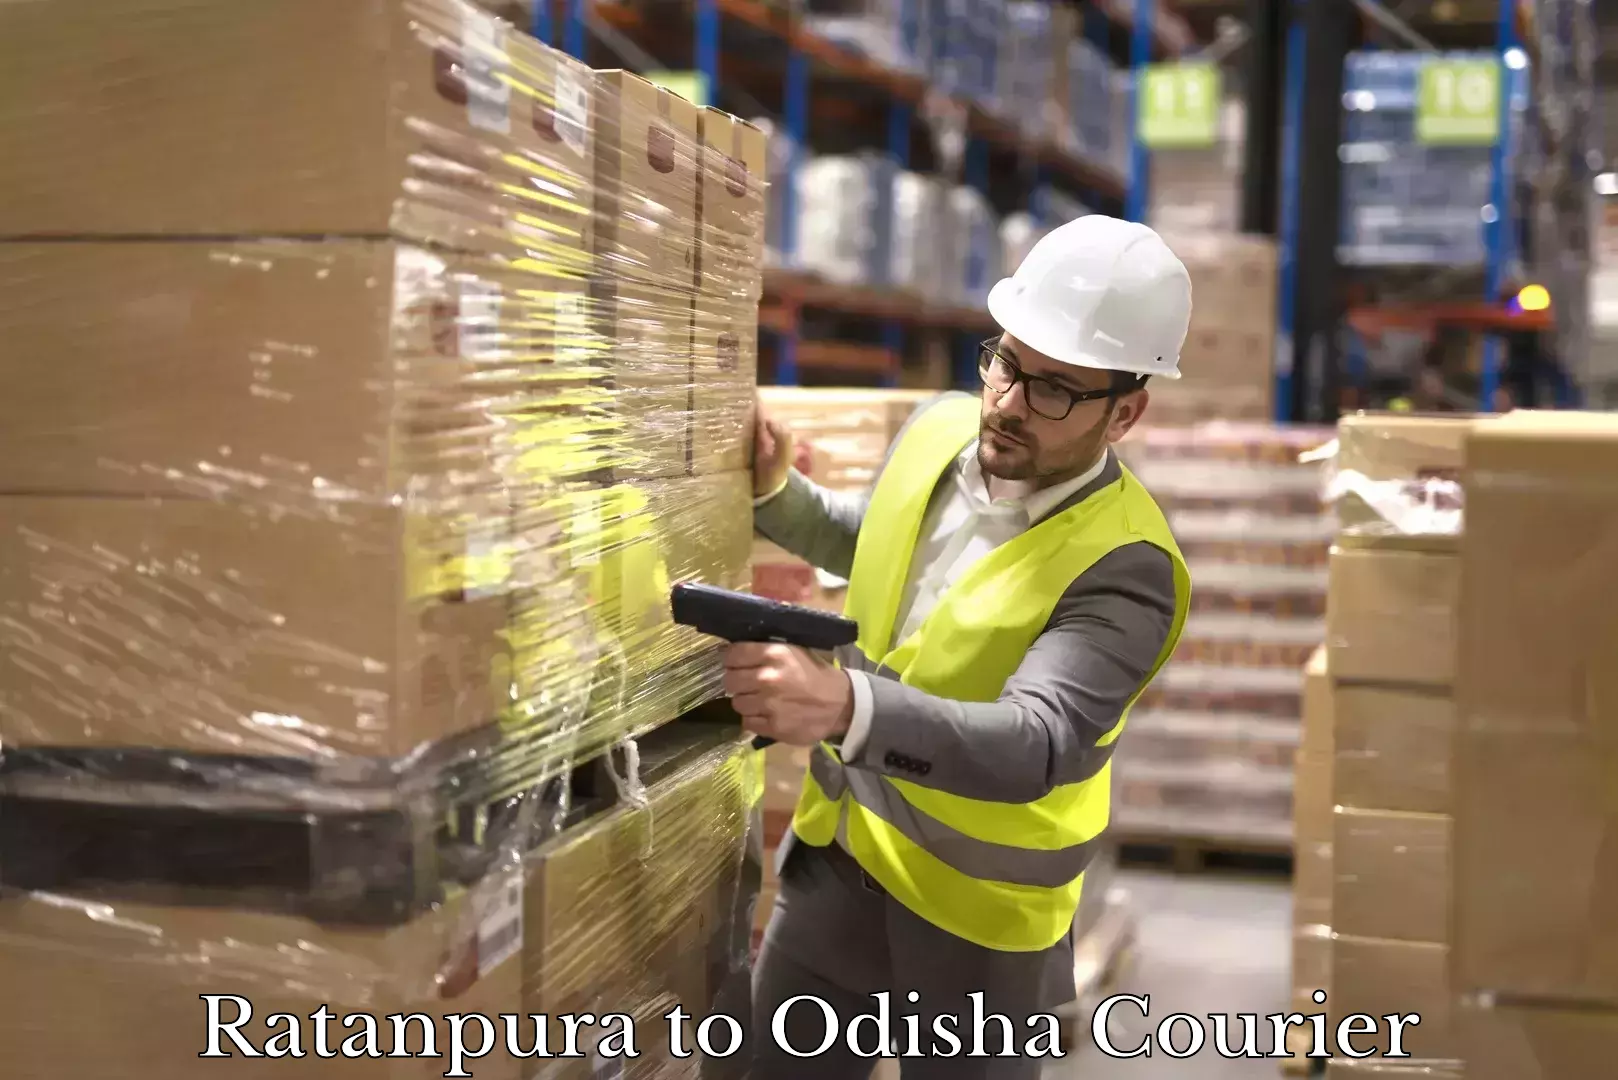 Customer-oriented courier services Ratanpura to Odisha